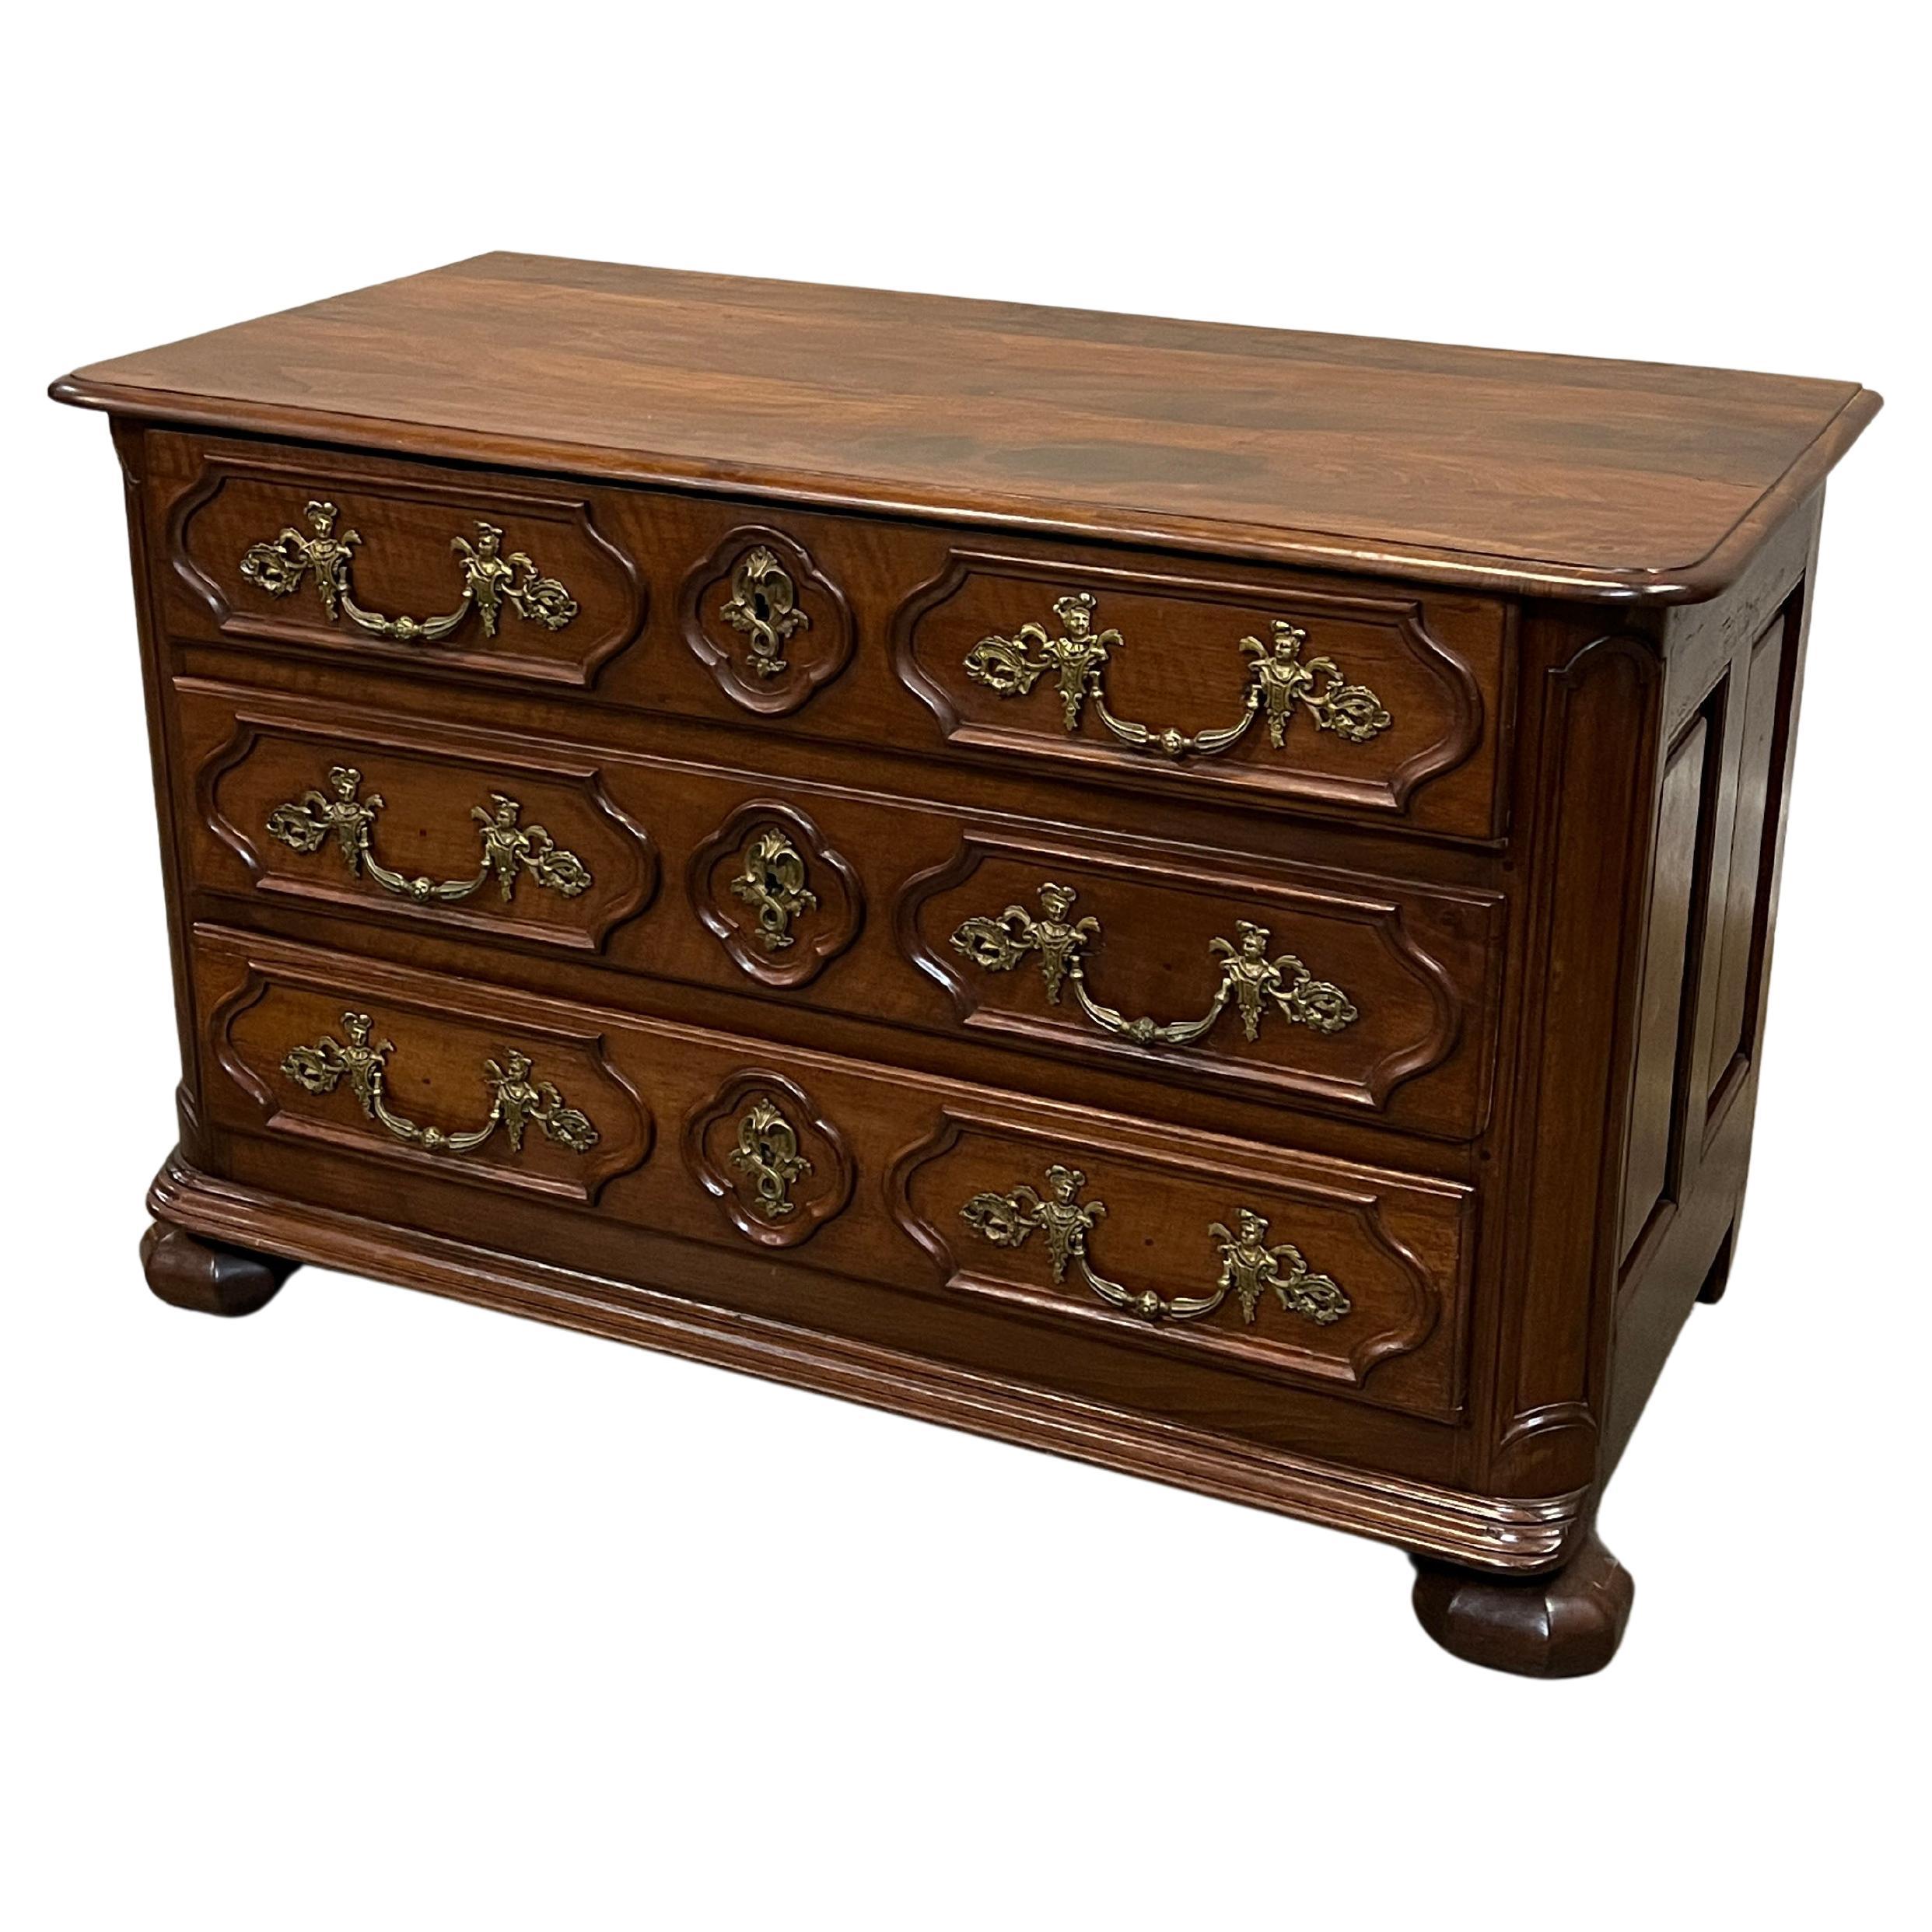 Late 18th Century French Louis XIV Transition Commode in Walnut